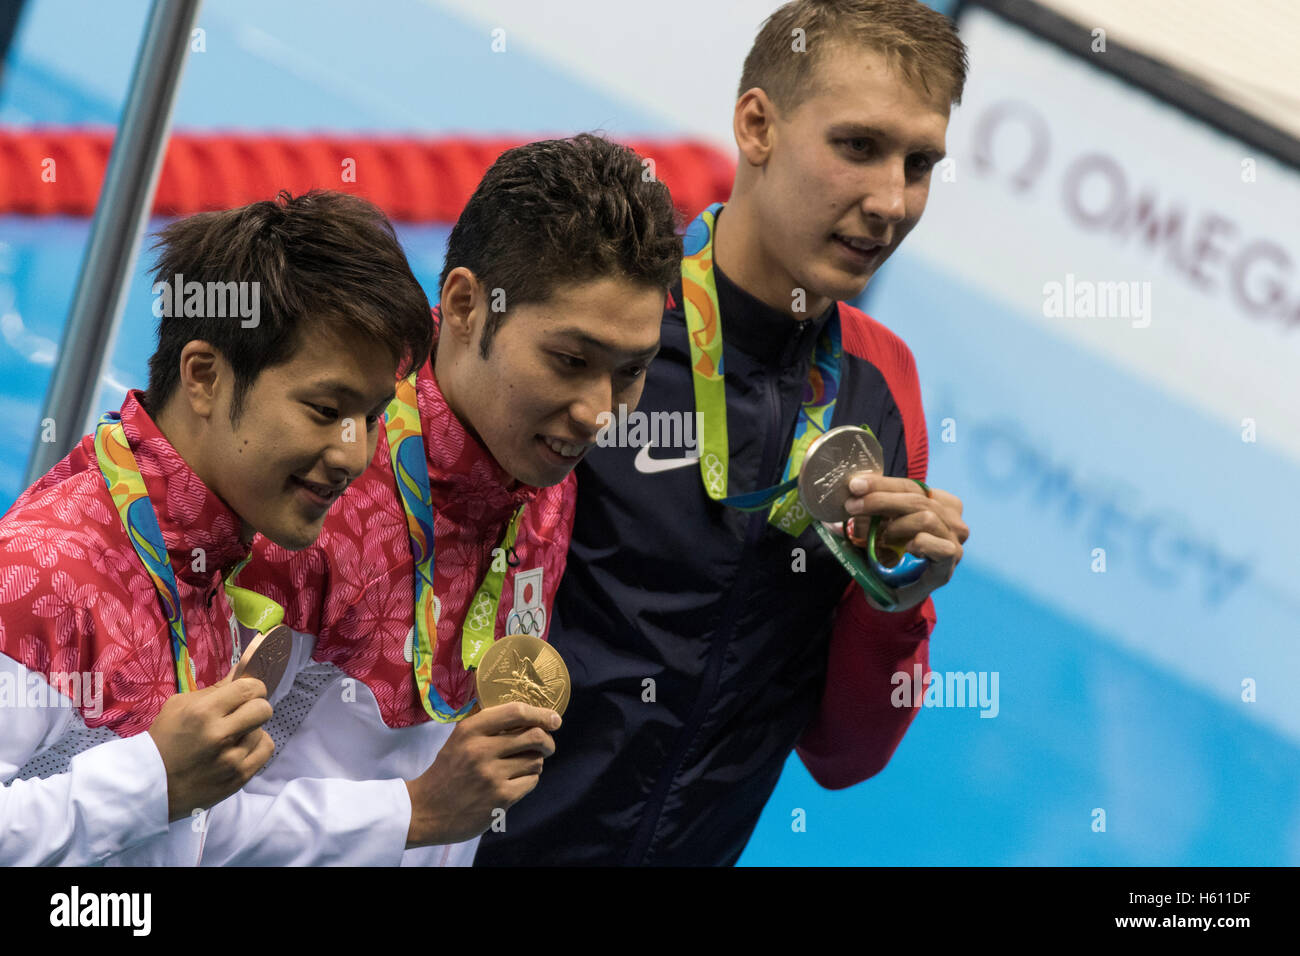 Rio de Janeiro, Brazil. 6 August 2016. Kosuke Hagino (JPN) -C-wins the gold medal in the men's 400m Individual Medley with Chase Kalisz (USA) -silver and  Daiya Seto (JPN) the bronze at the 2016 Olympic Summer Games. ©Paul J. Sutton/PCN Photography. Stock Photo